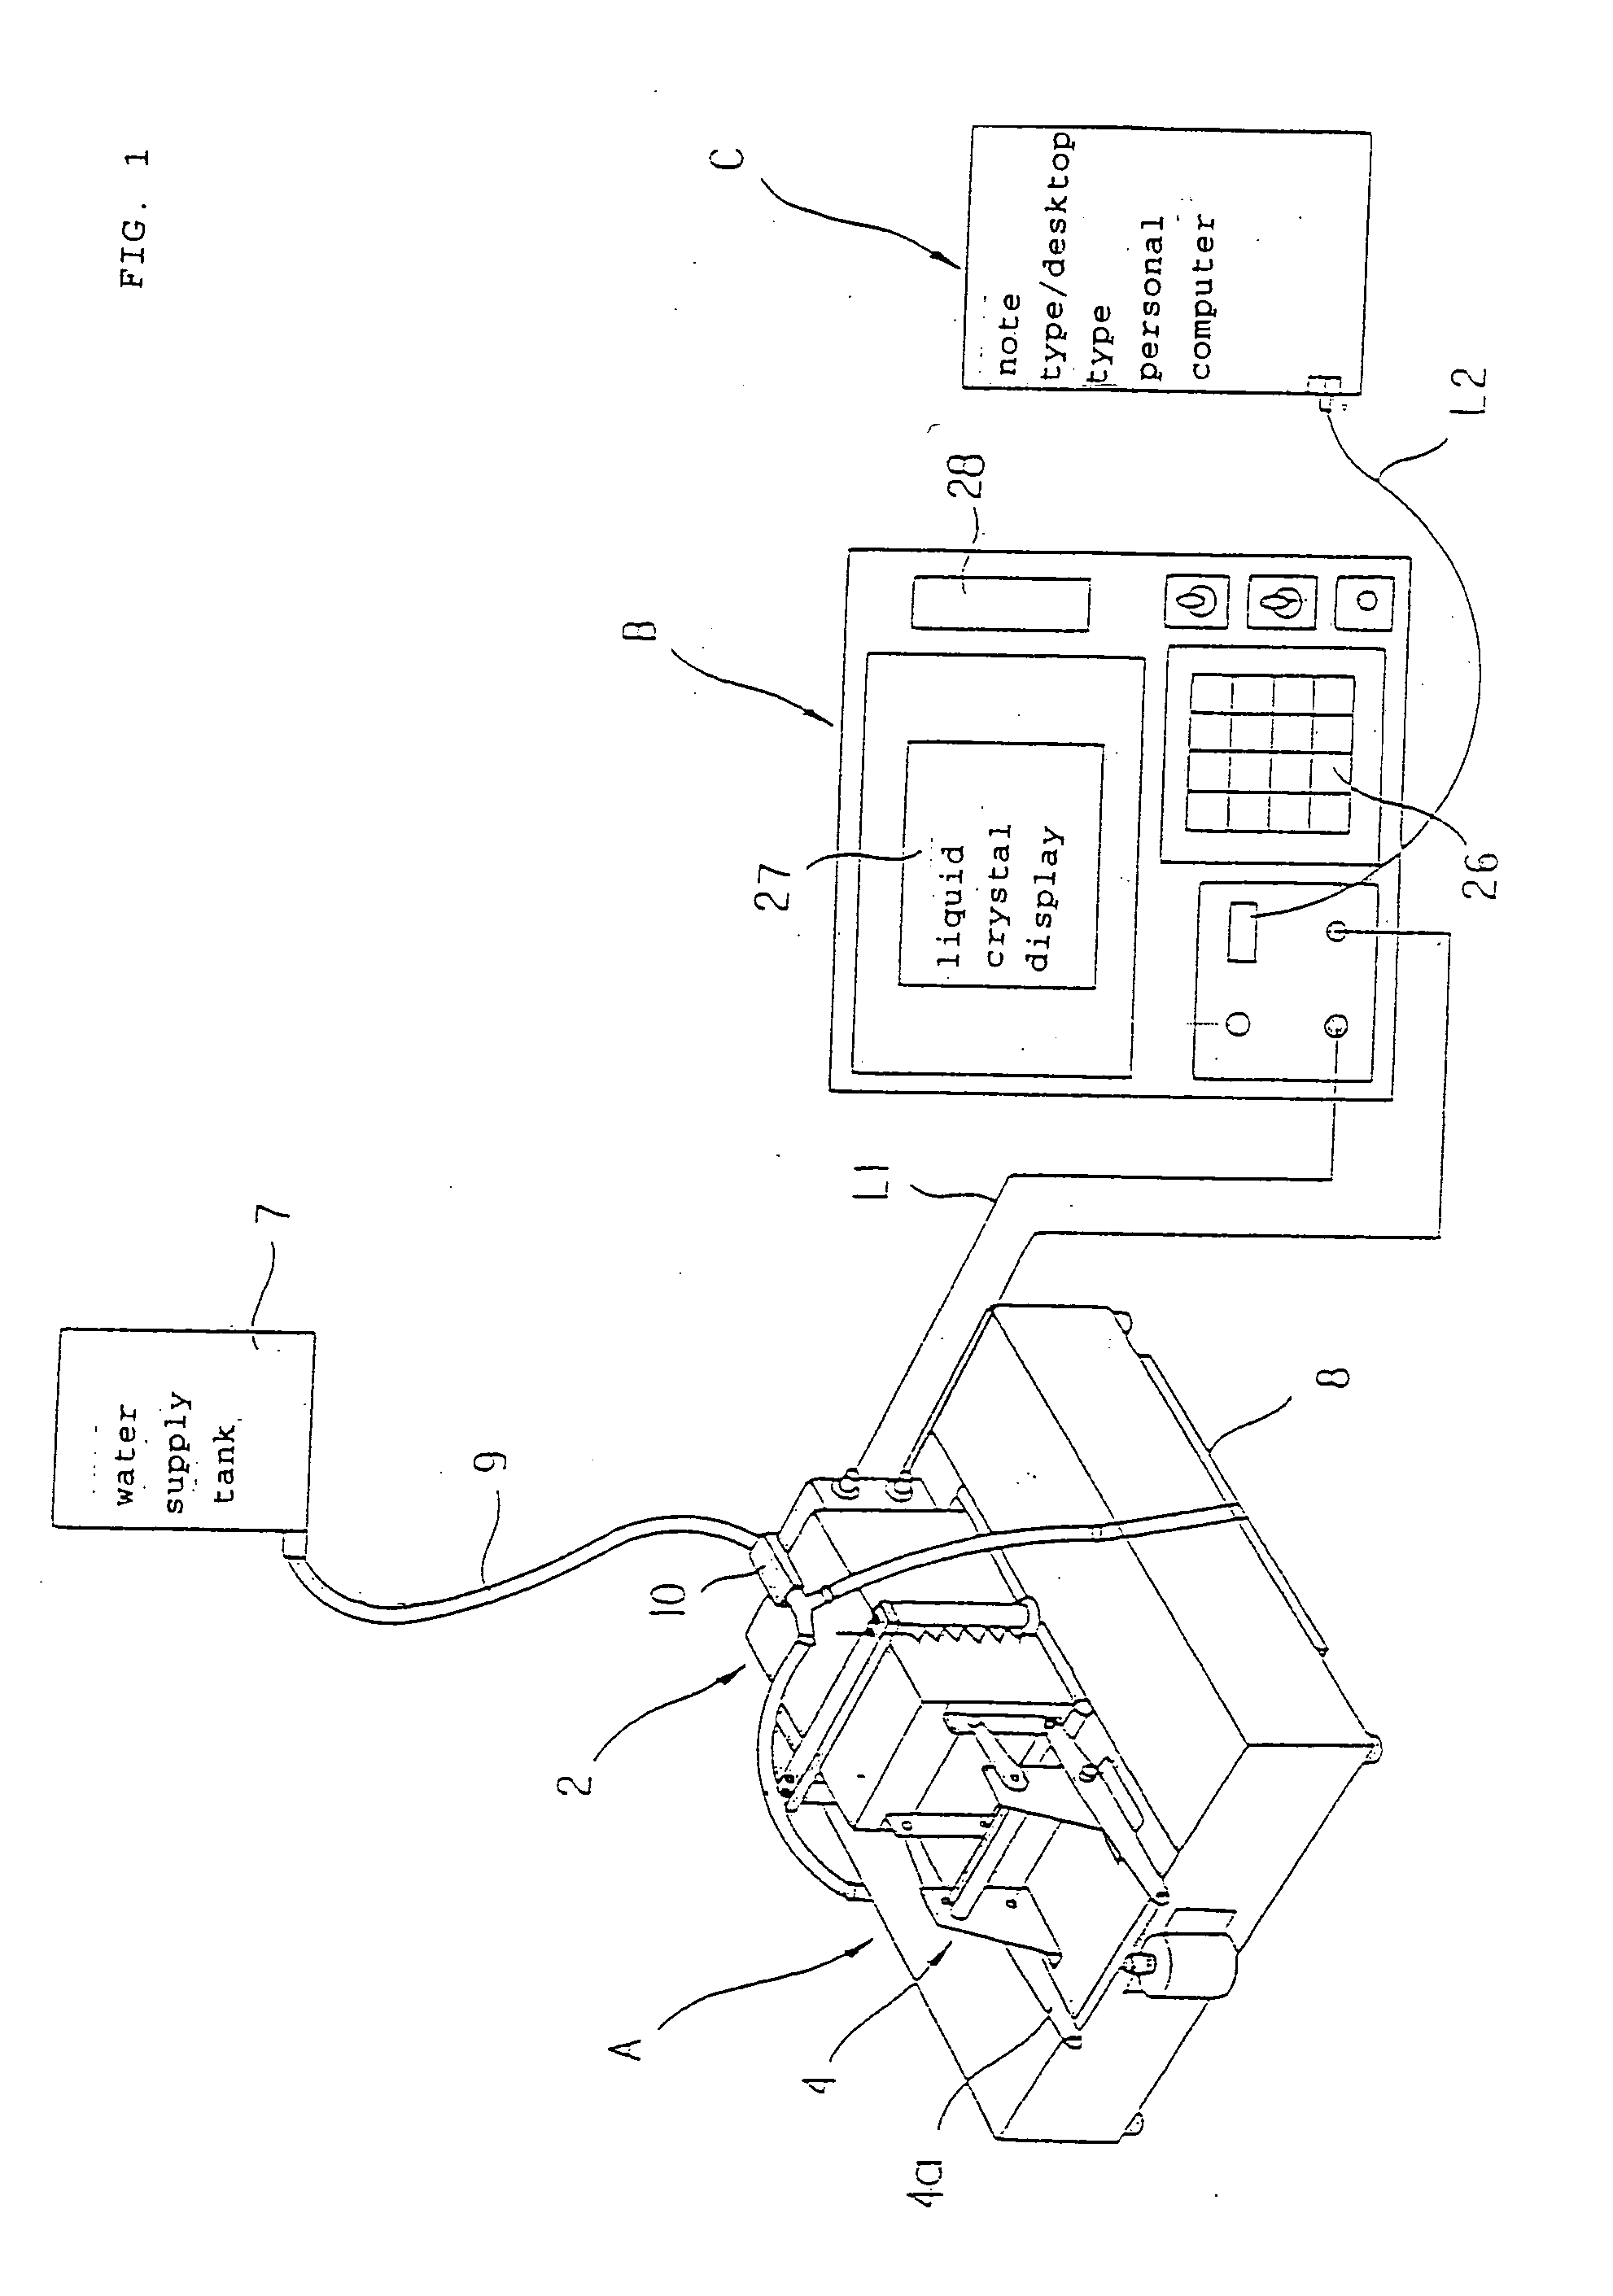 Method for measuring coefficient of friction